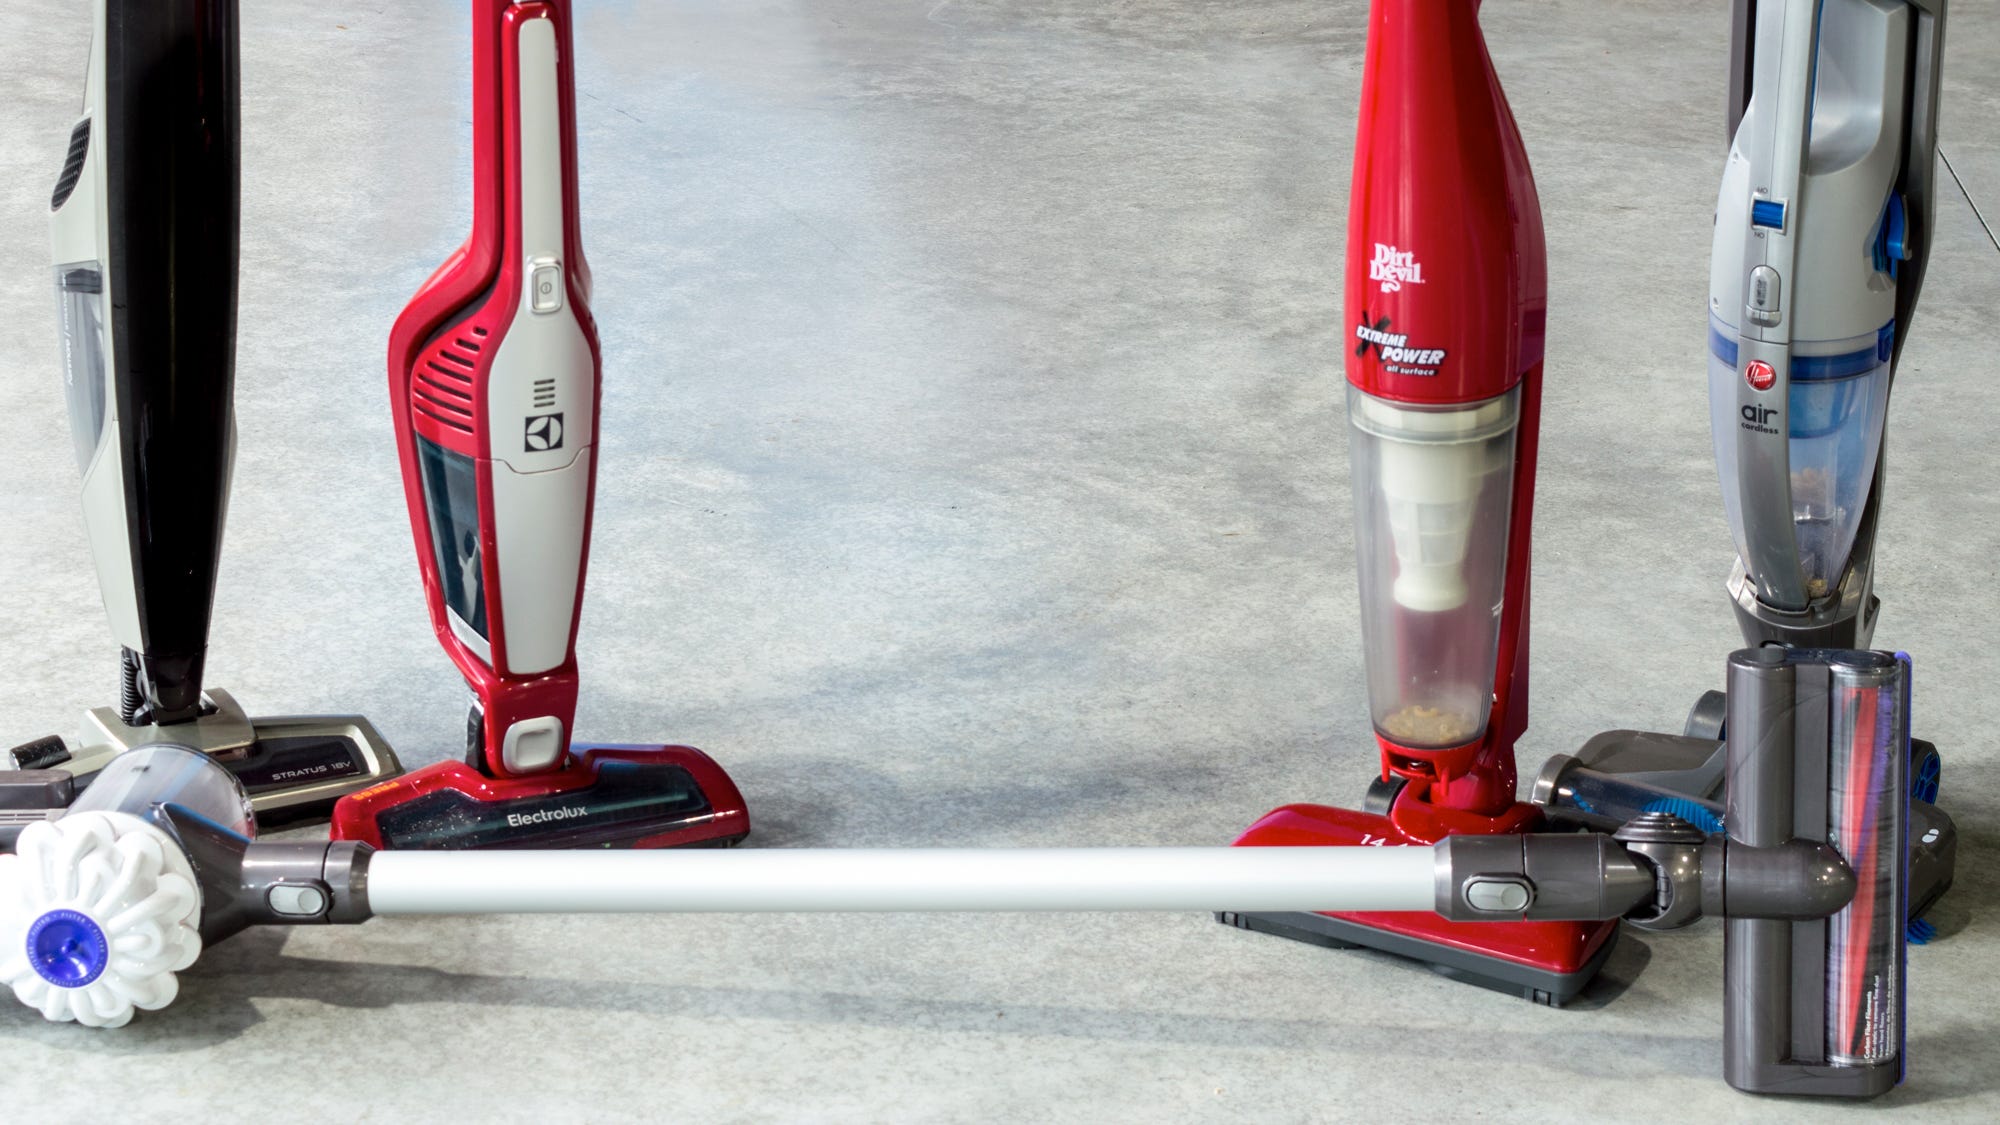 The Best Cordless Vacuums Of 2020, Best Cordless Vacuum For Hardwood Floors 2020